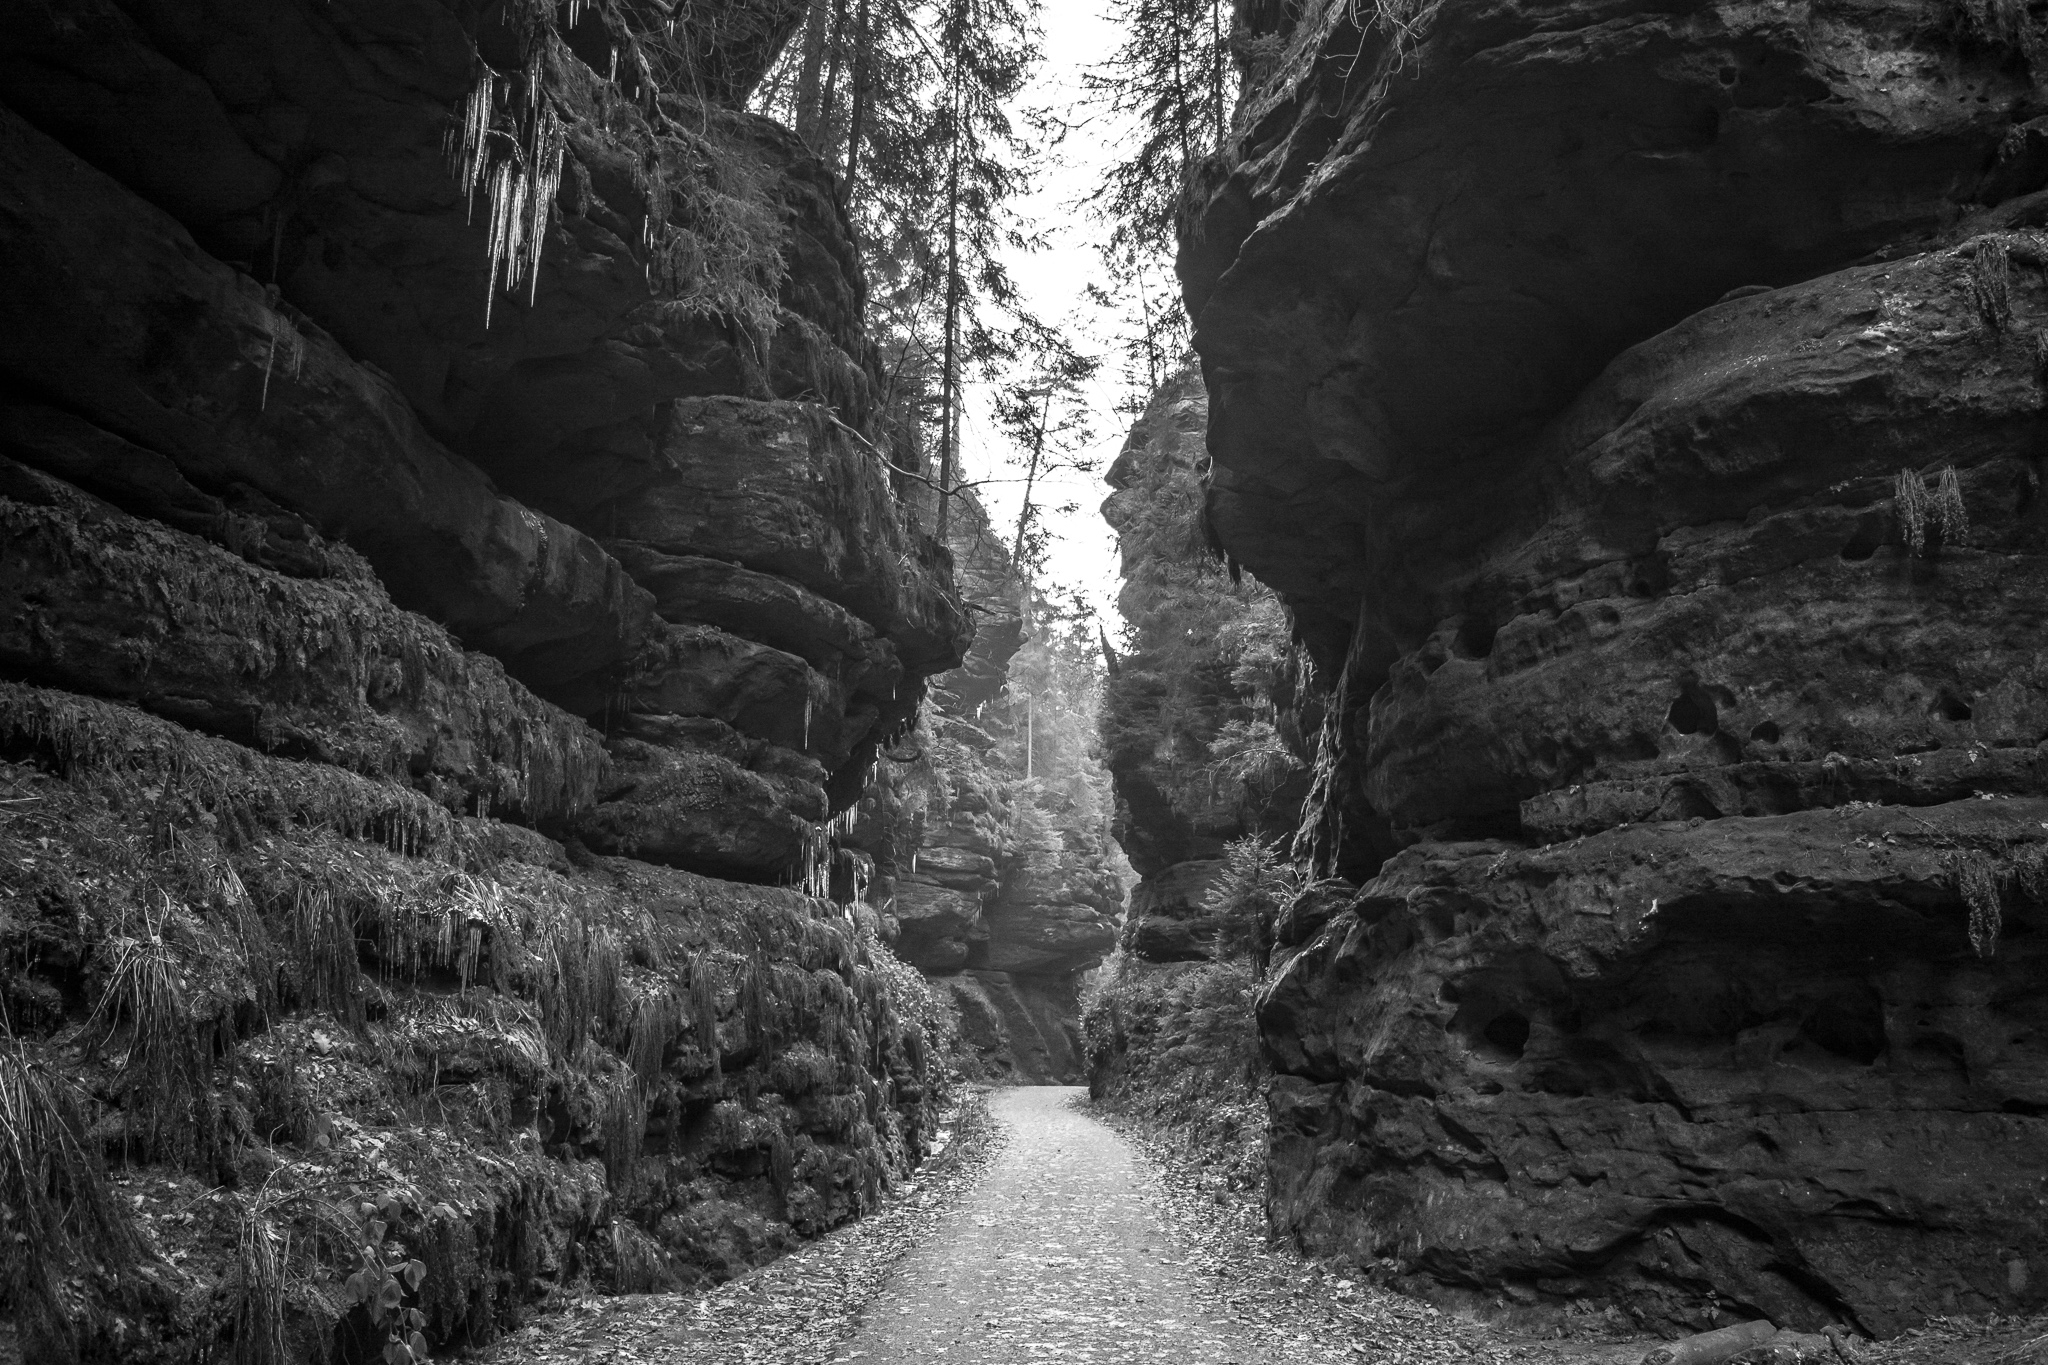 The National Park of Saxon Switzerland is located in Southeastern Germany and south of the city of Dresden. <br> The park, center of a natural space of almost 710 km², extends along the river Elbe. <br> Its characteristic sandstone mountains make up a rocky chain that rises 194 meters above the level of the river.